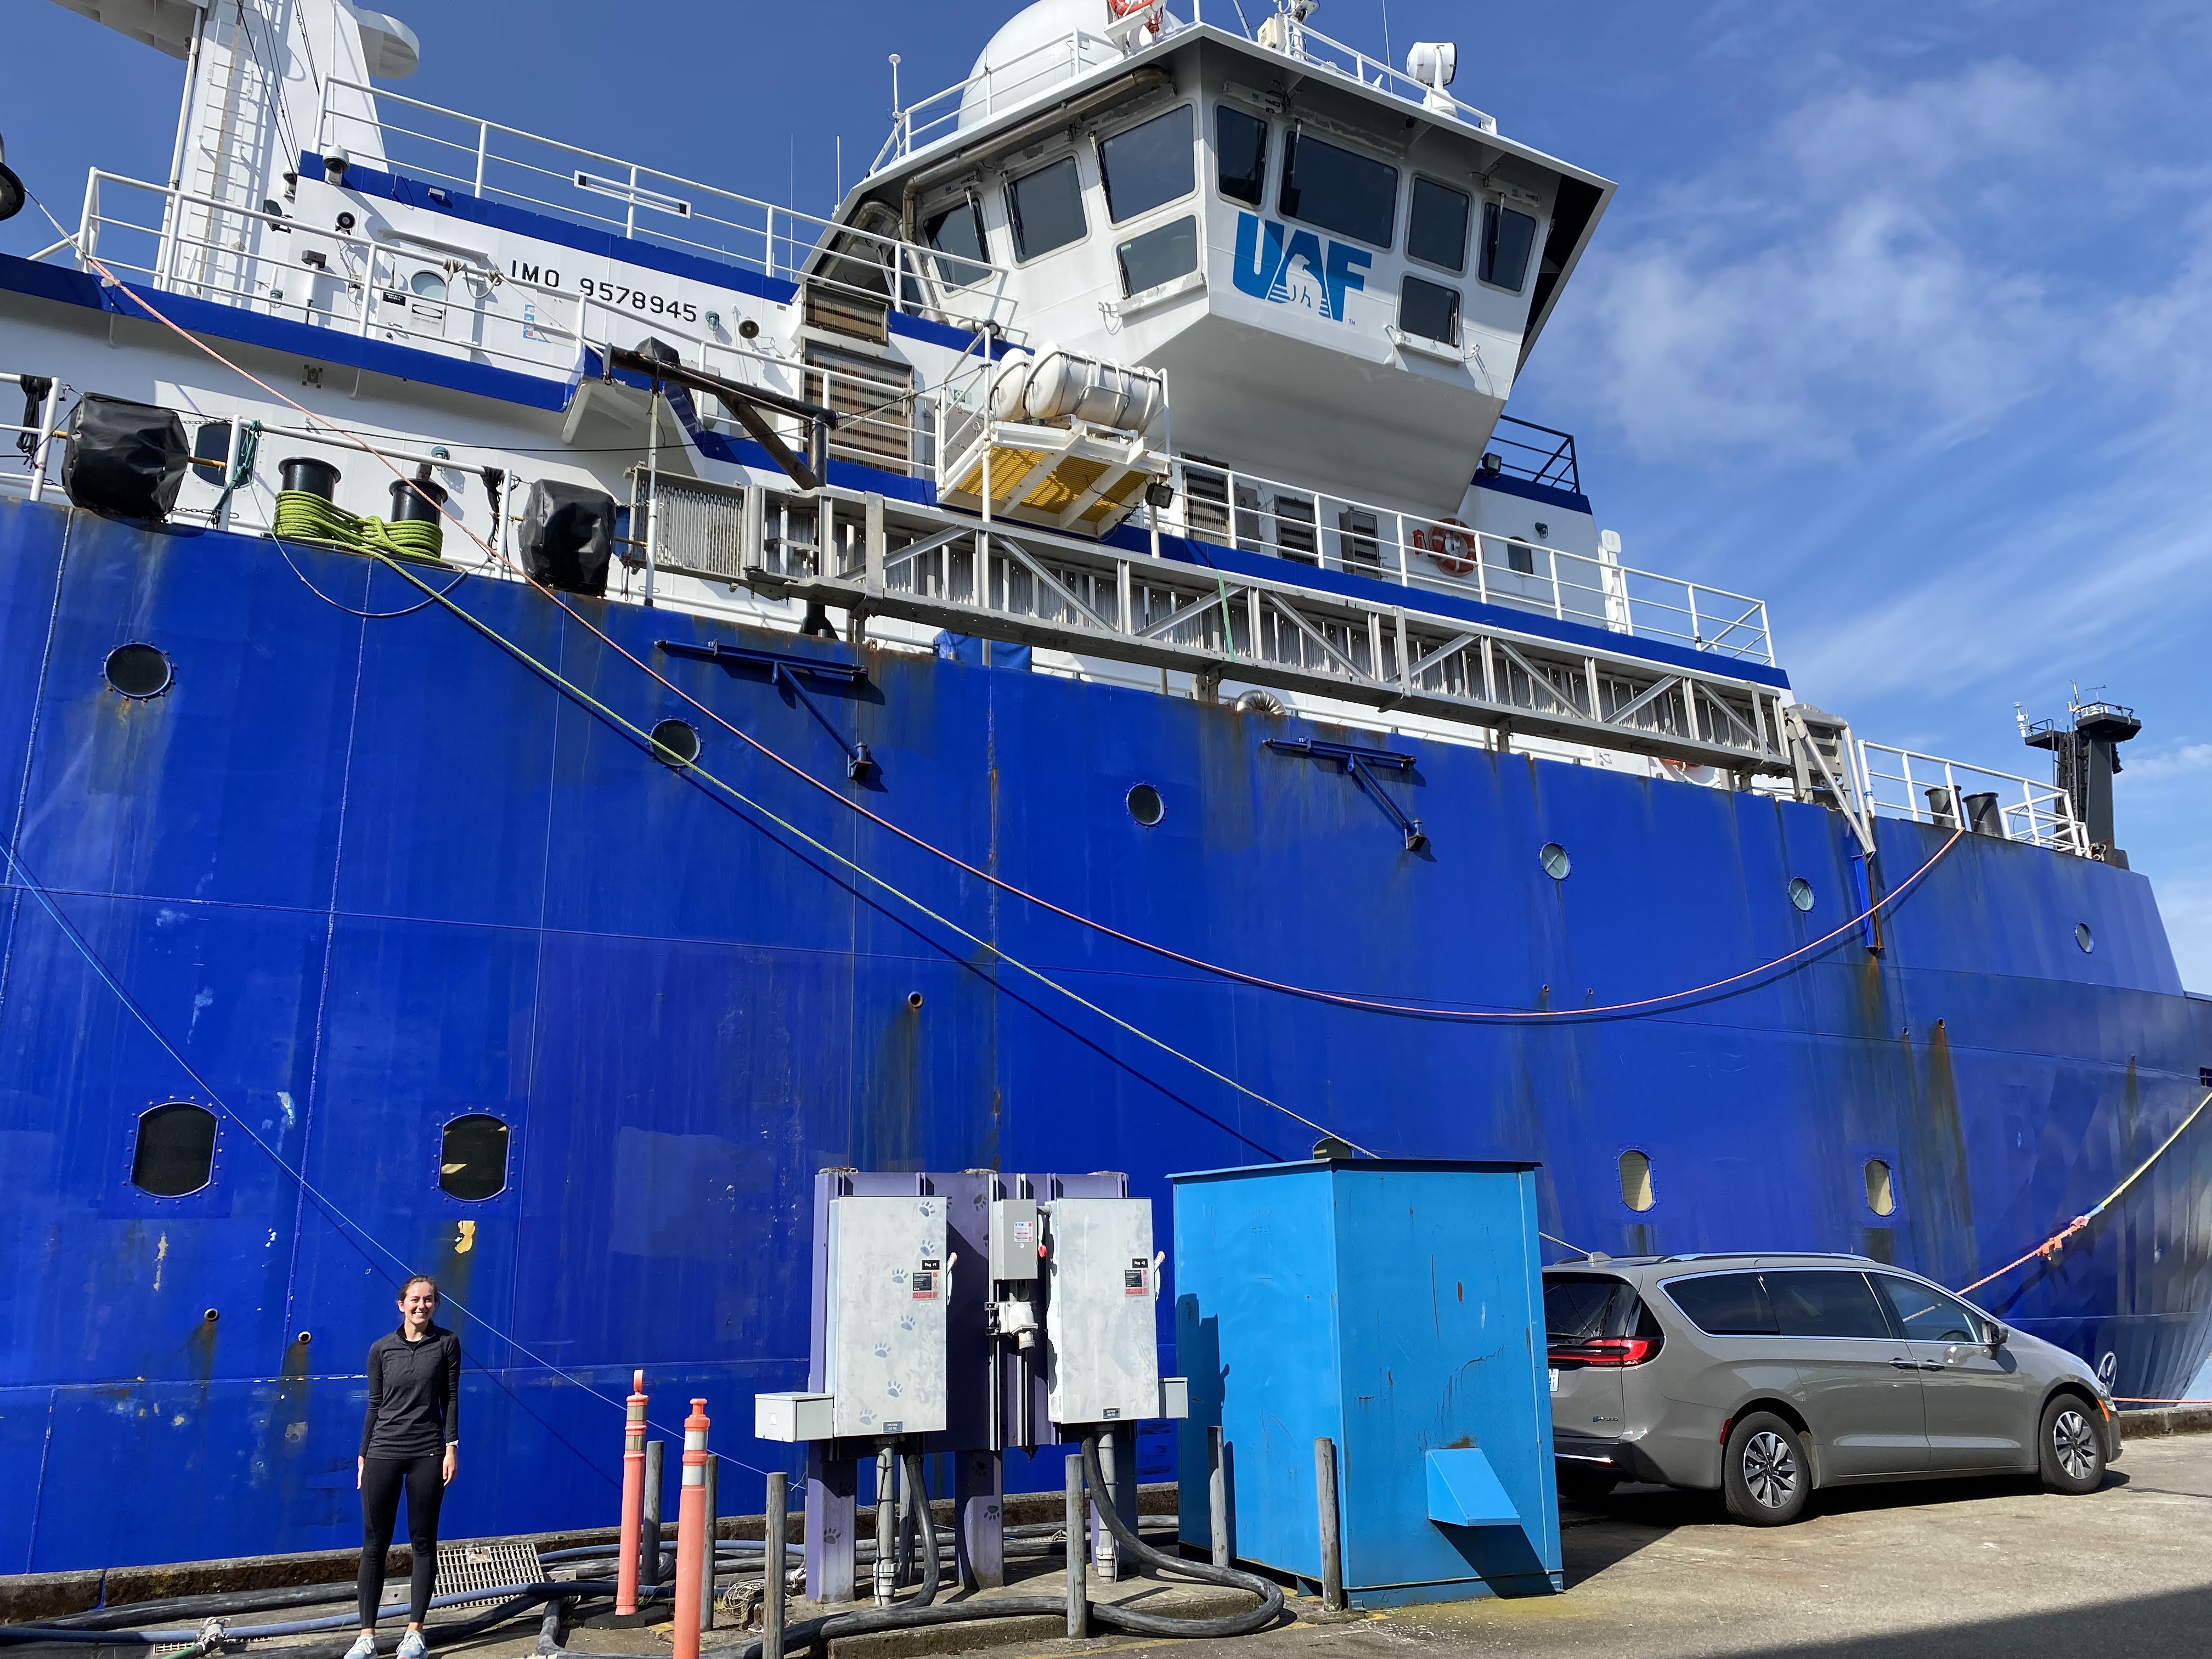 R/V Sikuliaq (next to me for scale).